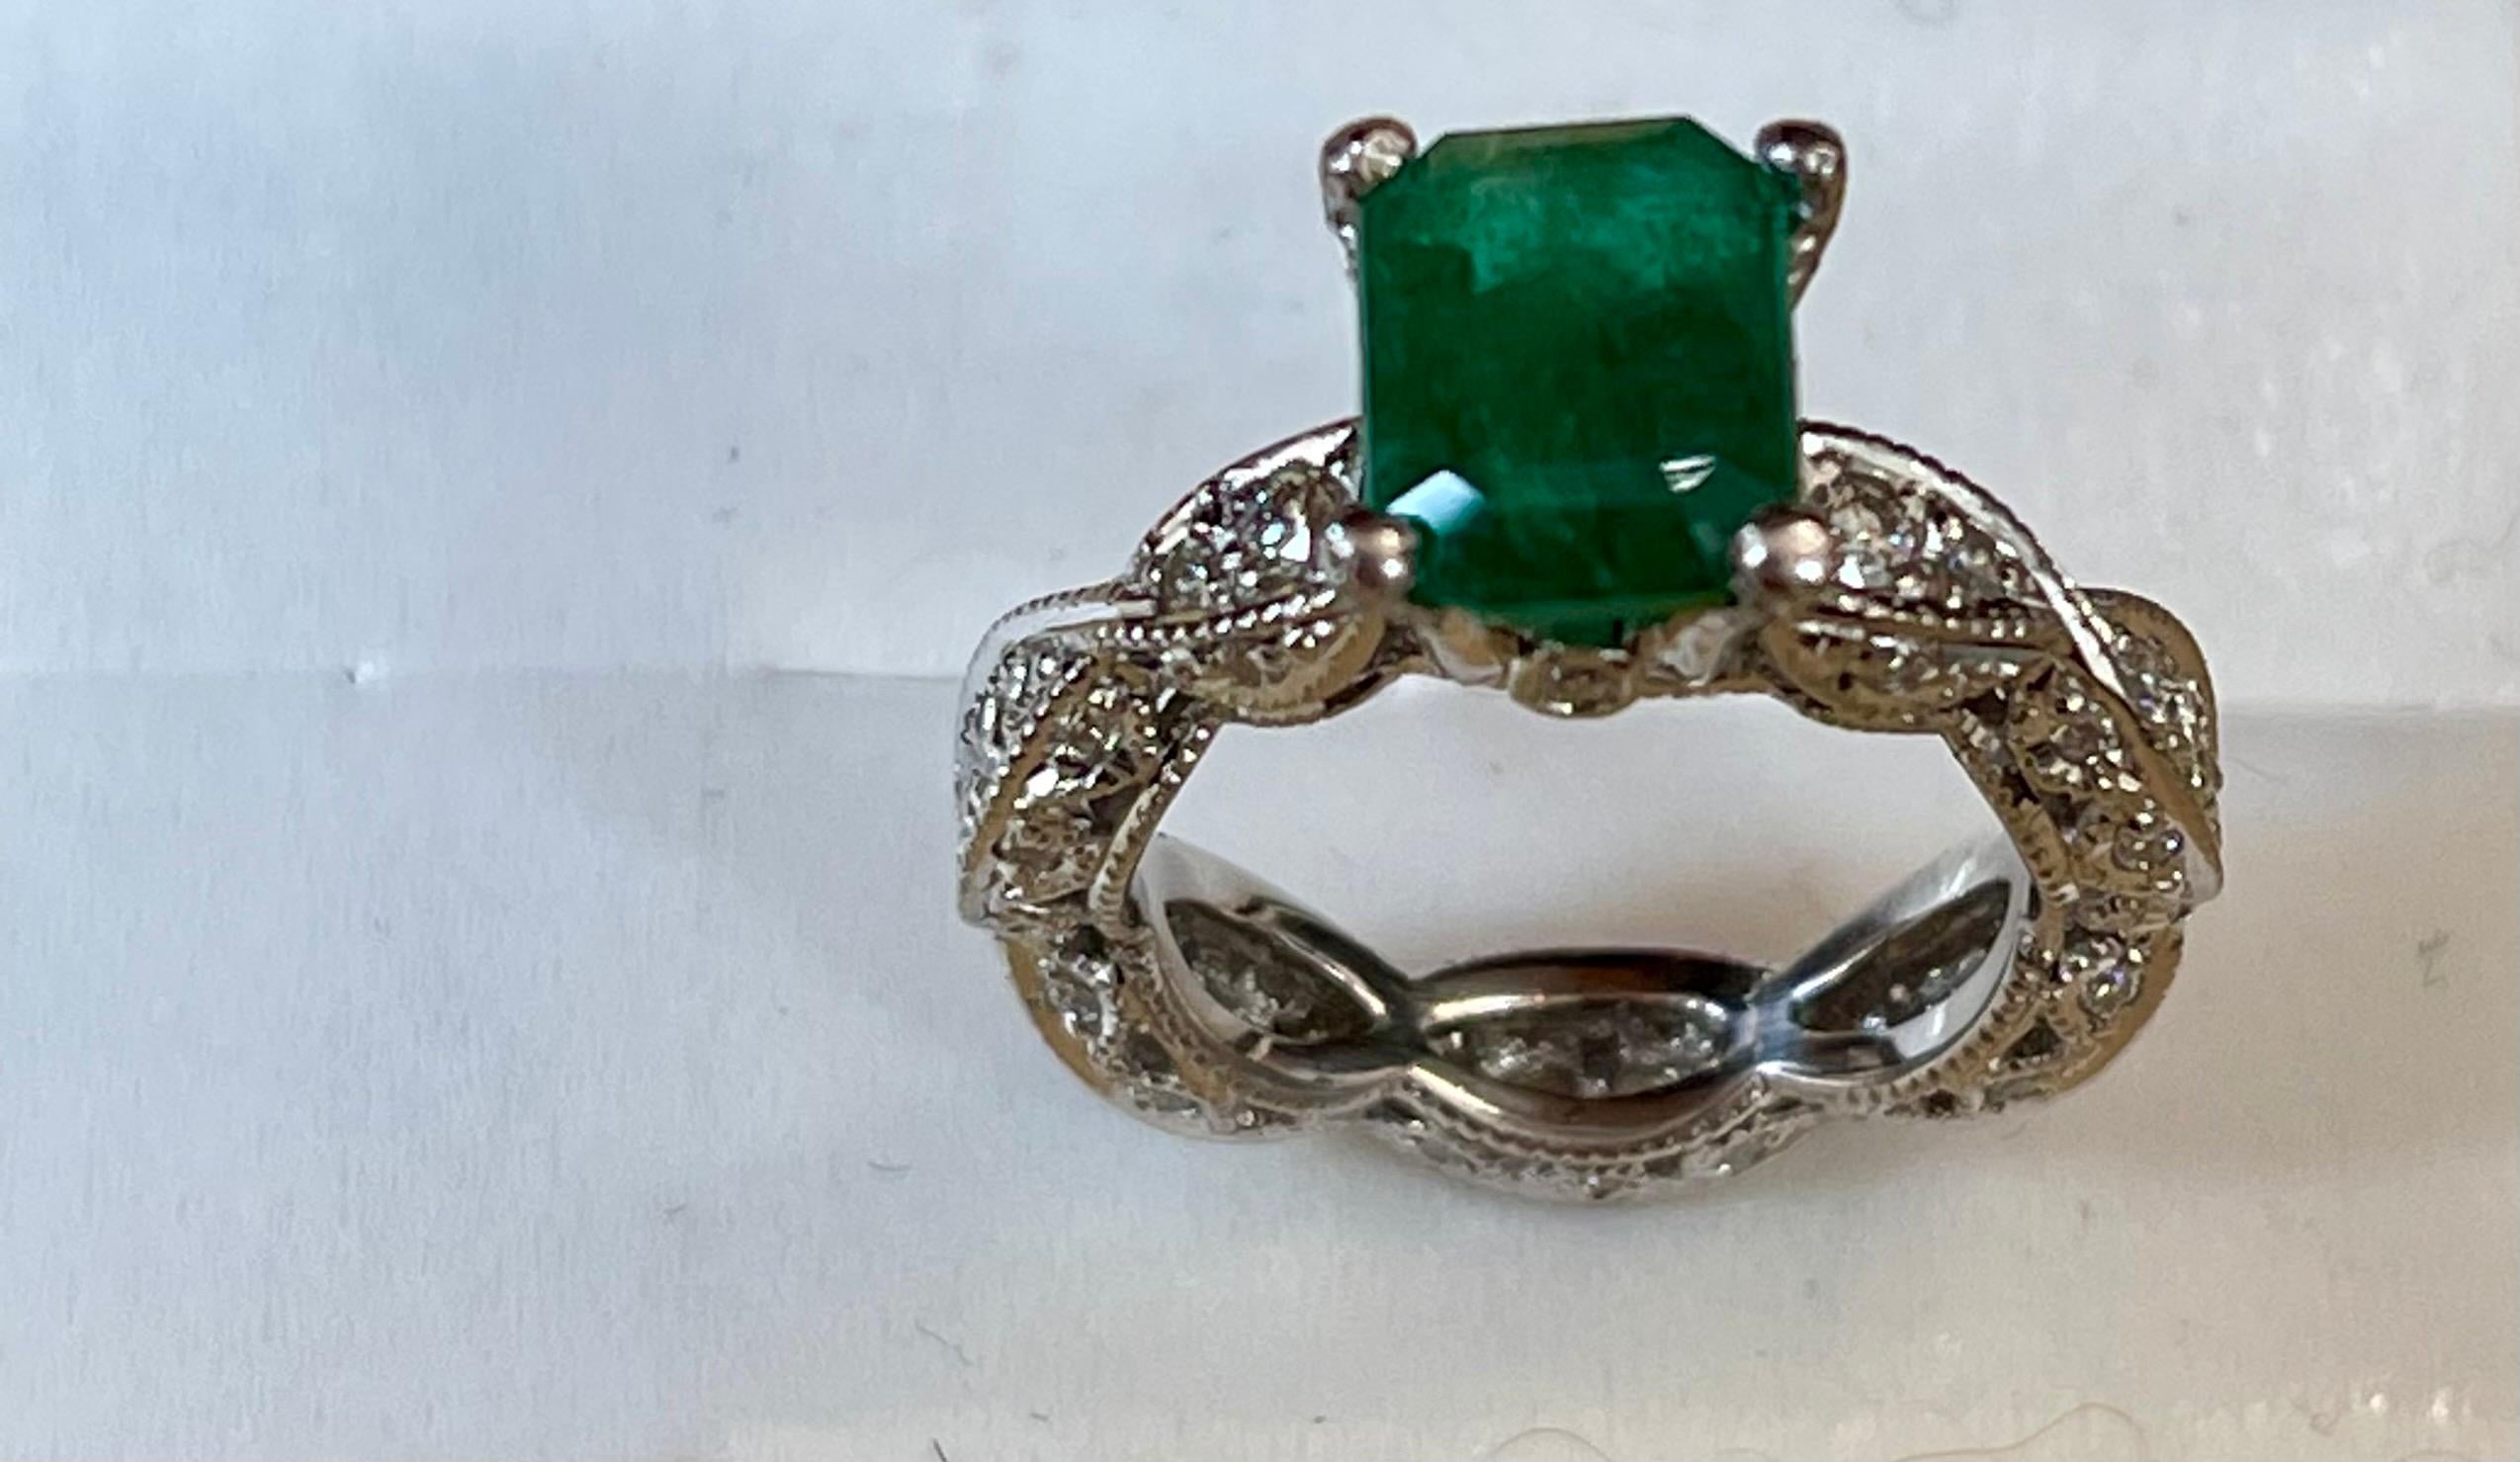 2 Carat Natural Emerald Cut Emerald    & 0.85 Ct  Diamond Ring In Platinum size 3.75
i am selling this ring at a very reasonable price.
Approximately  2  Carat Natural  Emerald & Diamond Ring  in Platinum
Intense green color, Beautiful stone with